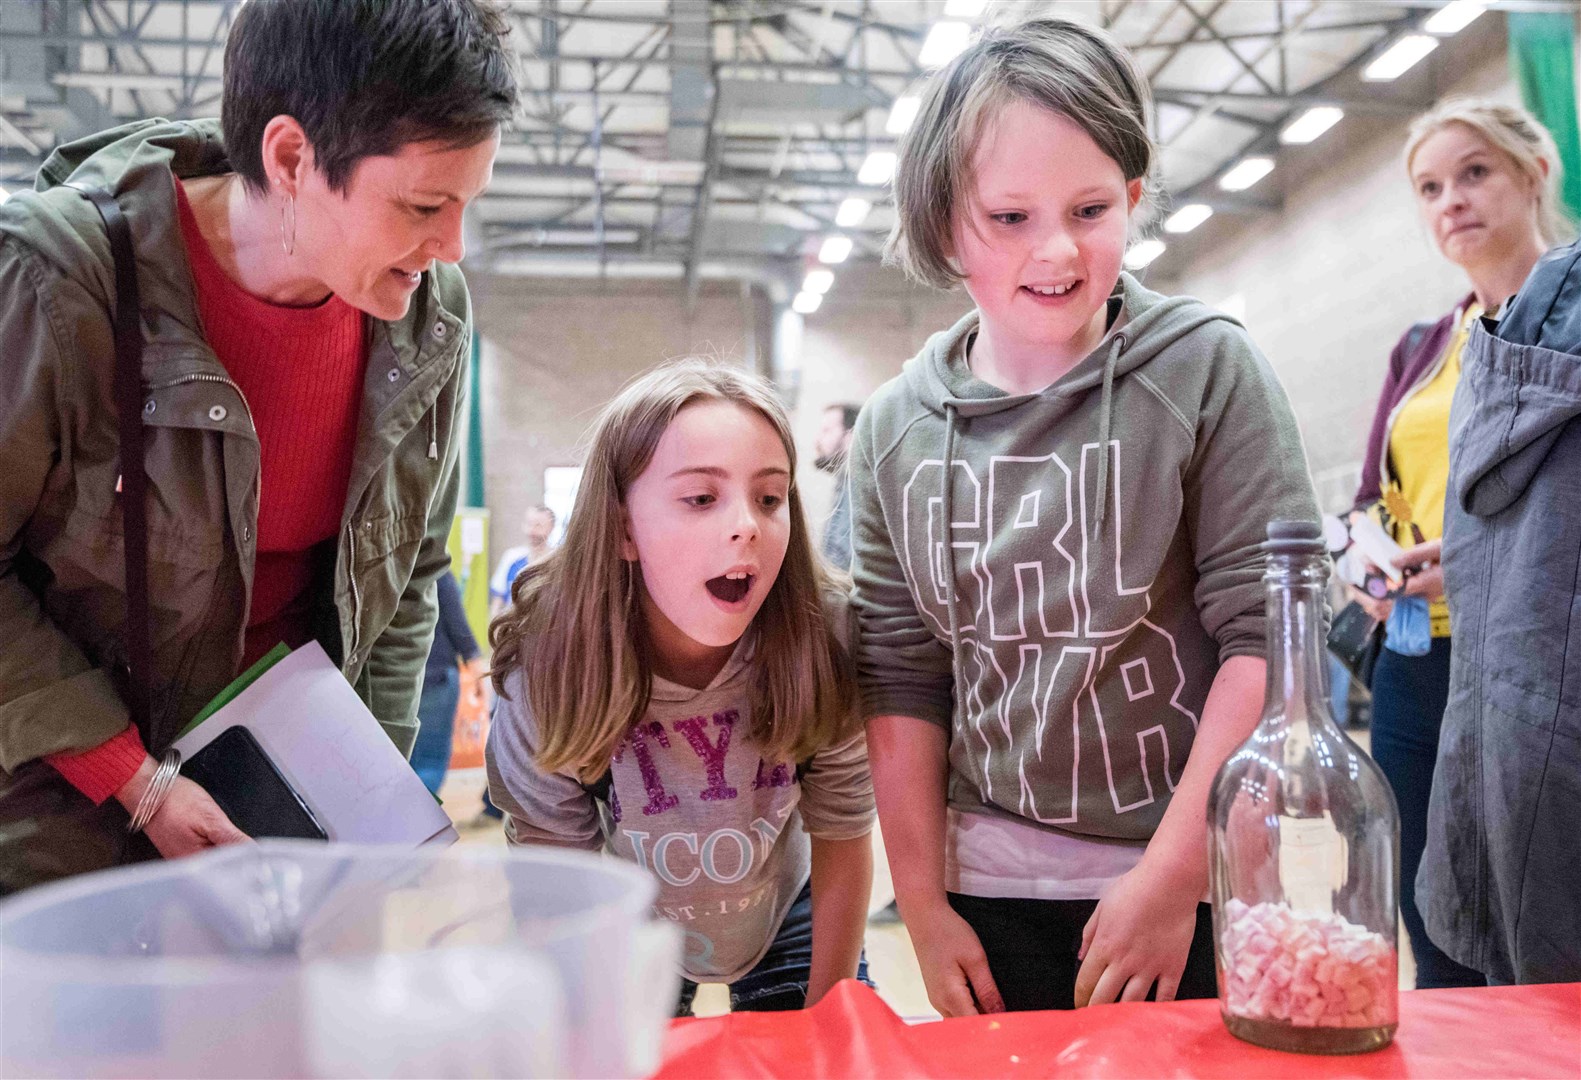 A family day at Inverness Leisure, which was part of the 2019 Inverness Science Festival programme.